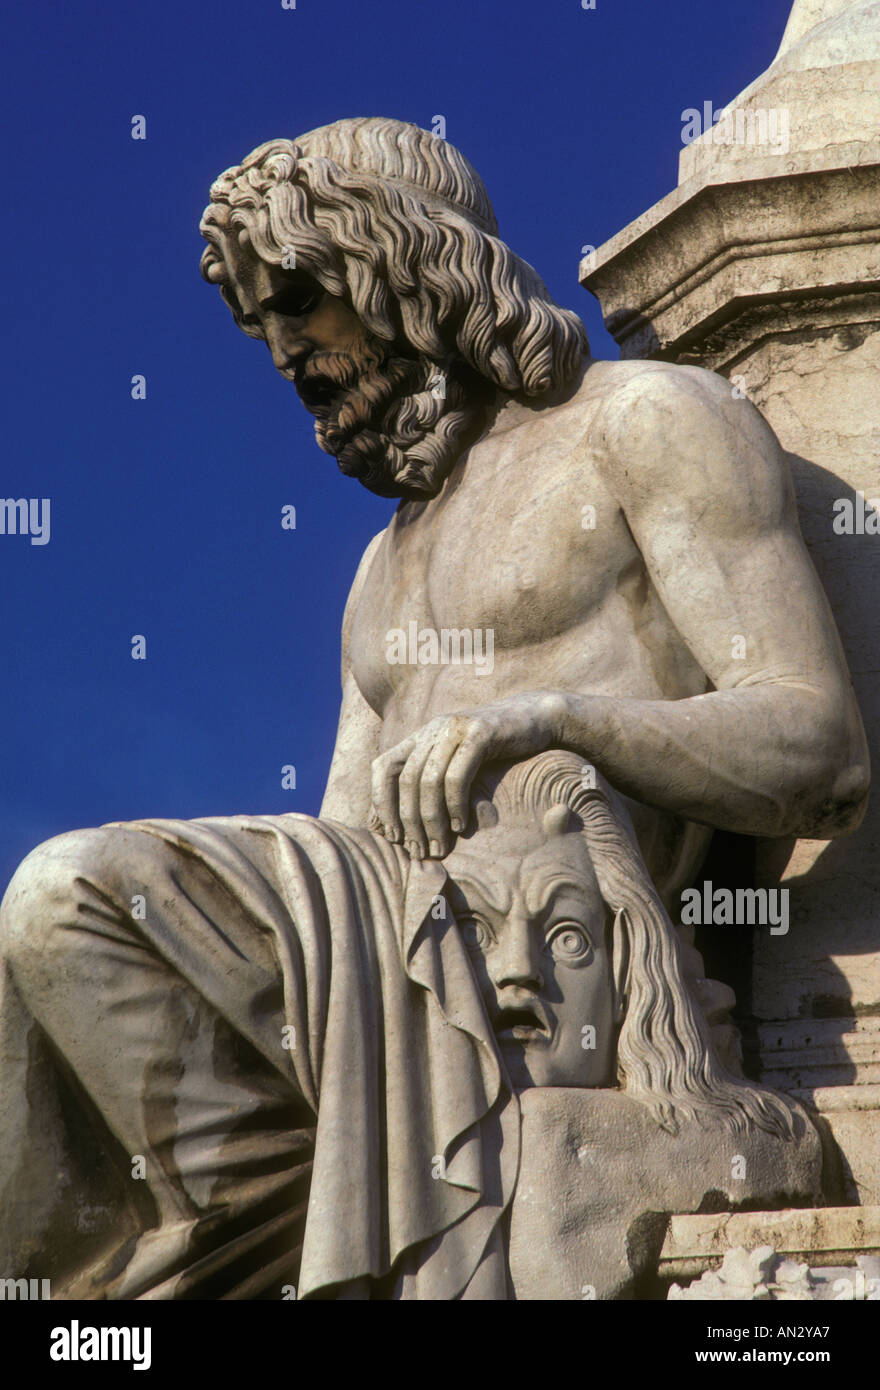 Pradier Fountain, on, Esplanade Charles de Gaulle, in the, city of, Nimes, Languedoc-Roussillon, France, Europe Stock Photo